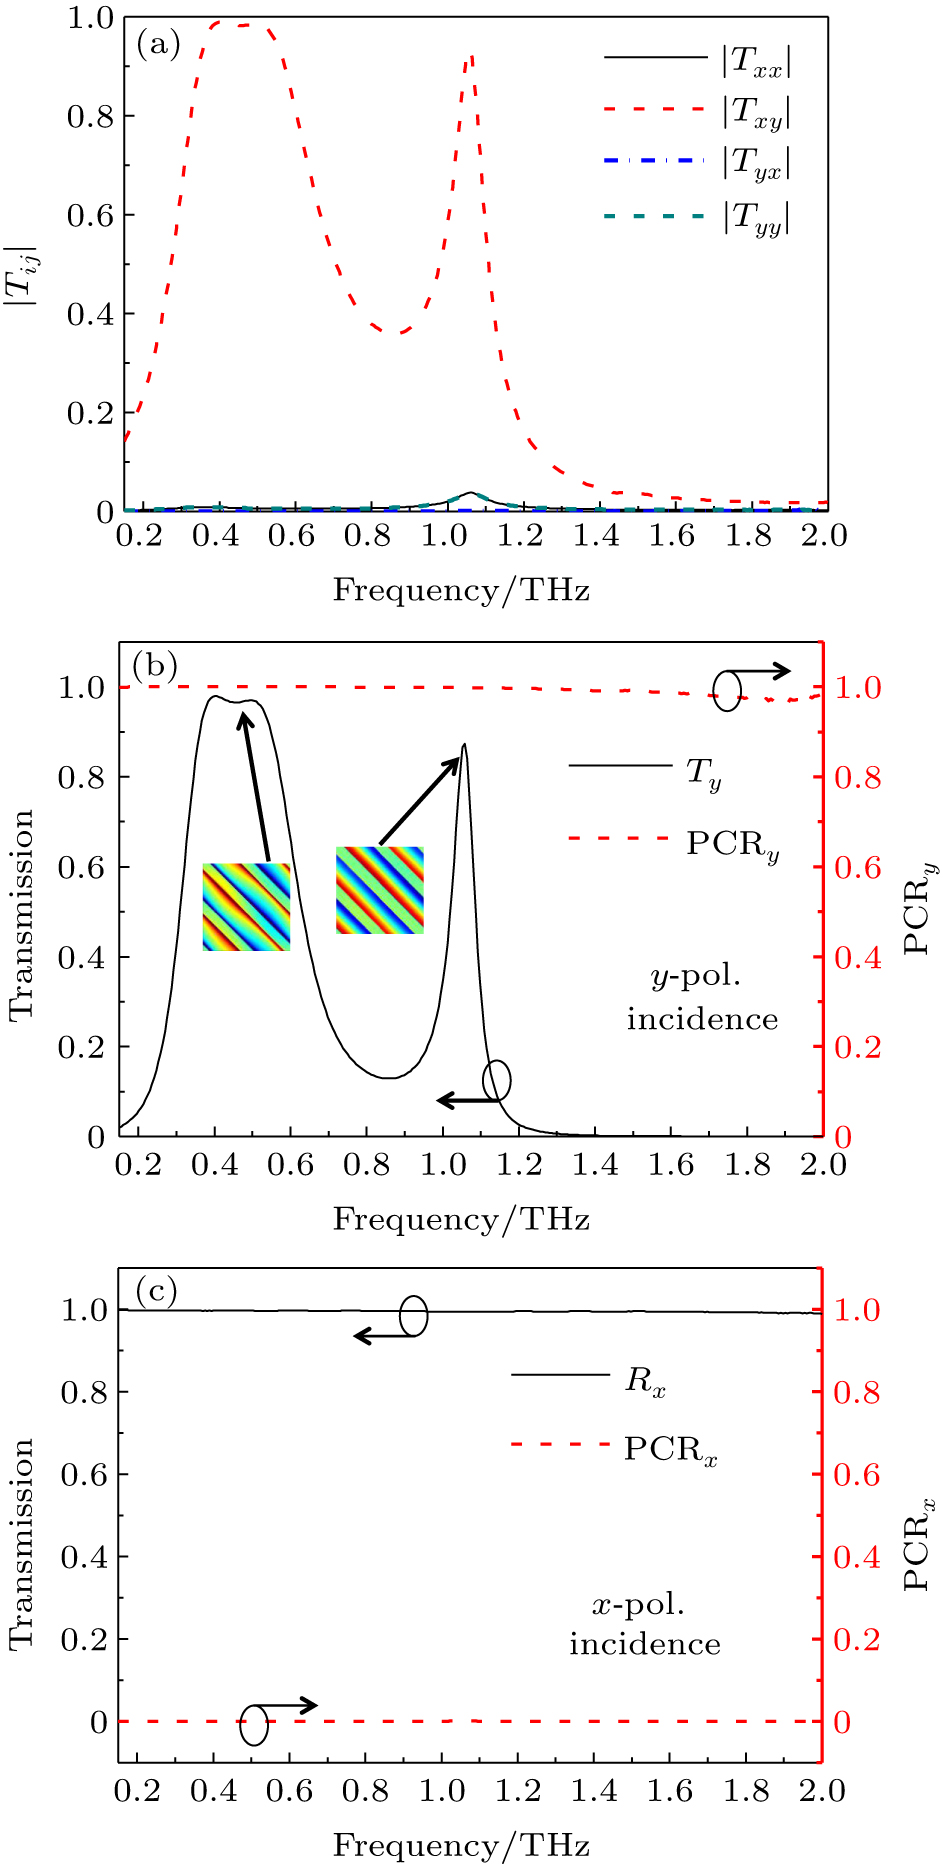 (a) Moduli of the T matrix coefficients for forward propagation. (b) Transmission and PCR spectra for y-polarization (y-pol.) incidence. Insets are z-component electric field distributions in the middle x–y plane of the middle grating structure at the frequencies of 0.453 THz and 1.058 THz, respectively. (c) Reflection and PCR spectra for x-polarization (x-pol.) incidence.